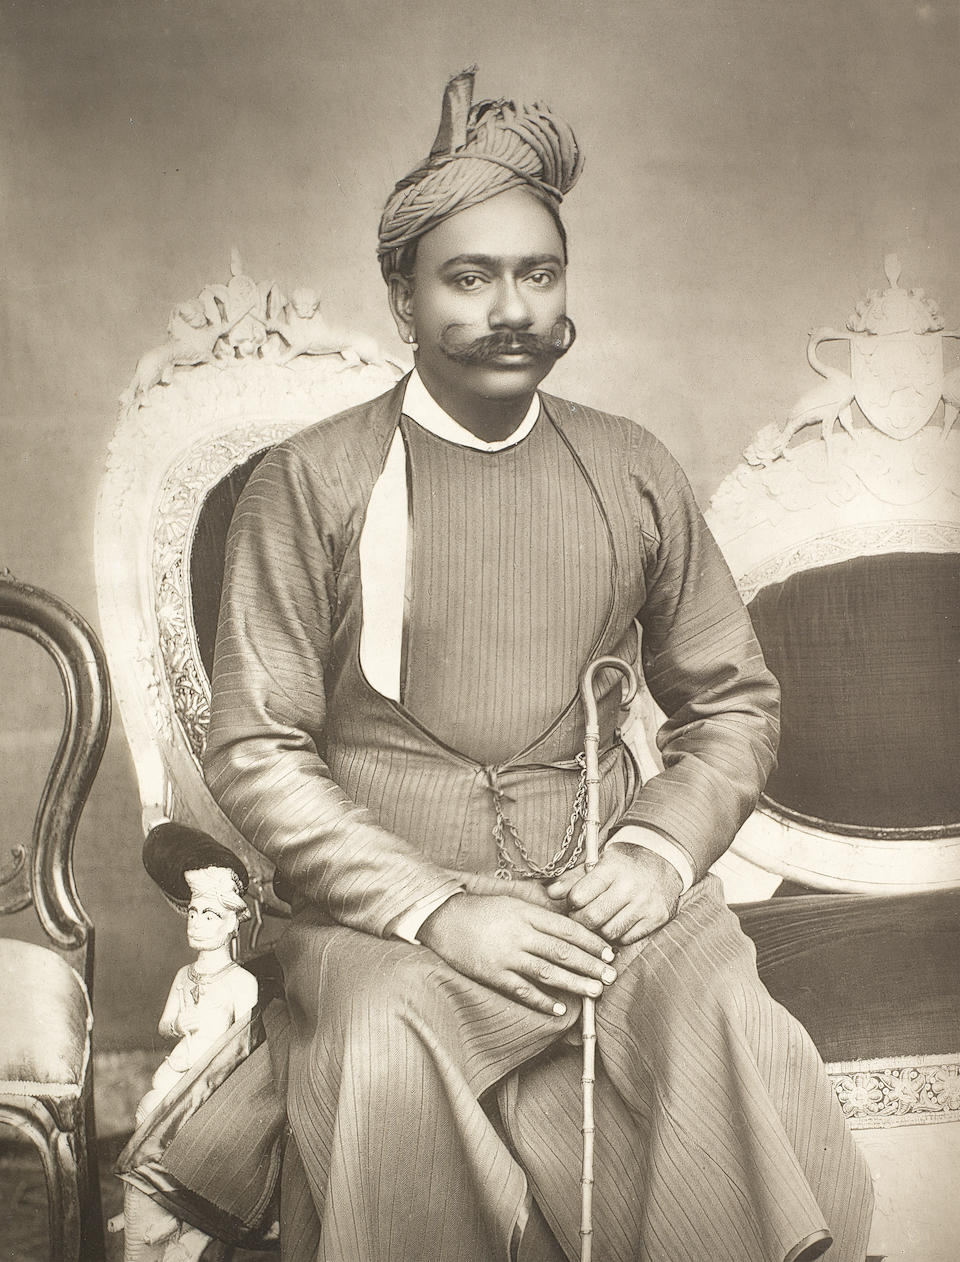 JEHANGIR (SORABJI) Princes and Chiefs of India. A Collection of Biographies and Portraits of the Indian Princes and Chiefs and Brief Historical Surveys of the Territories... Revised and Completed by F.S. Jehangir Tal&#233;yarkhan, 3 vol., FIRST EDITION, Waterlow & Sons, 1903